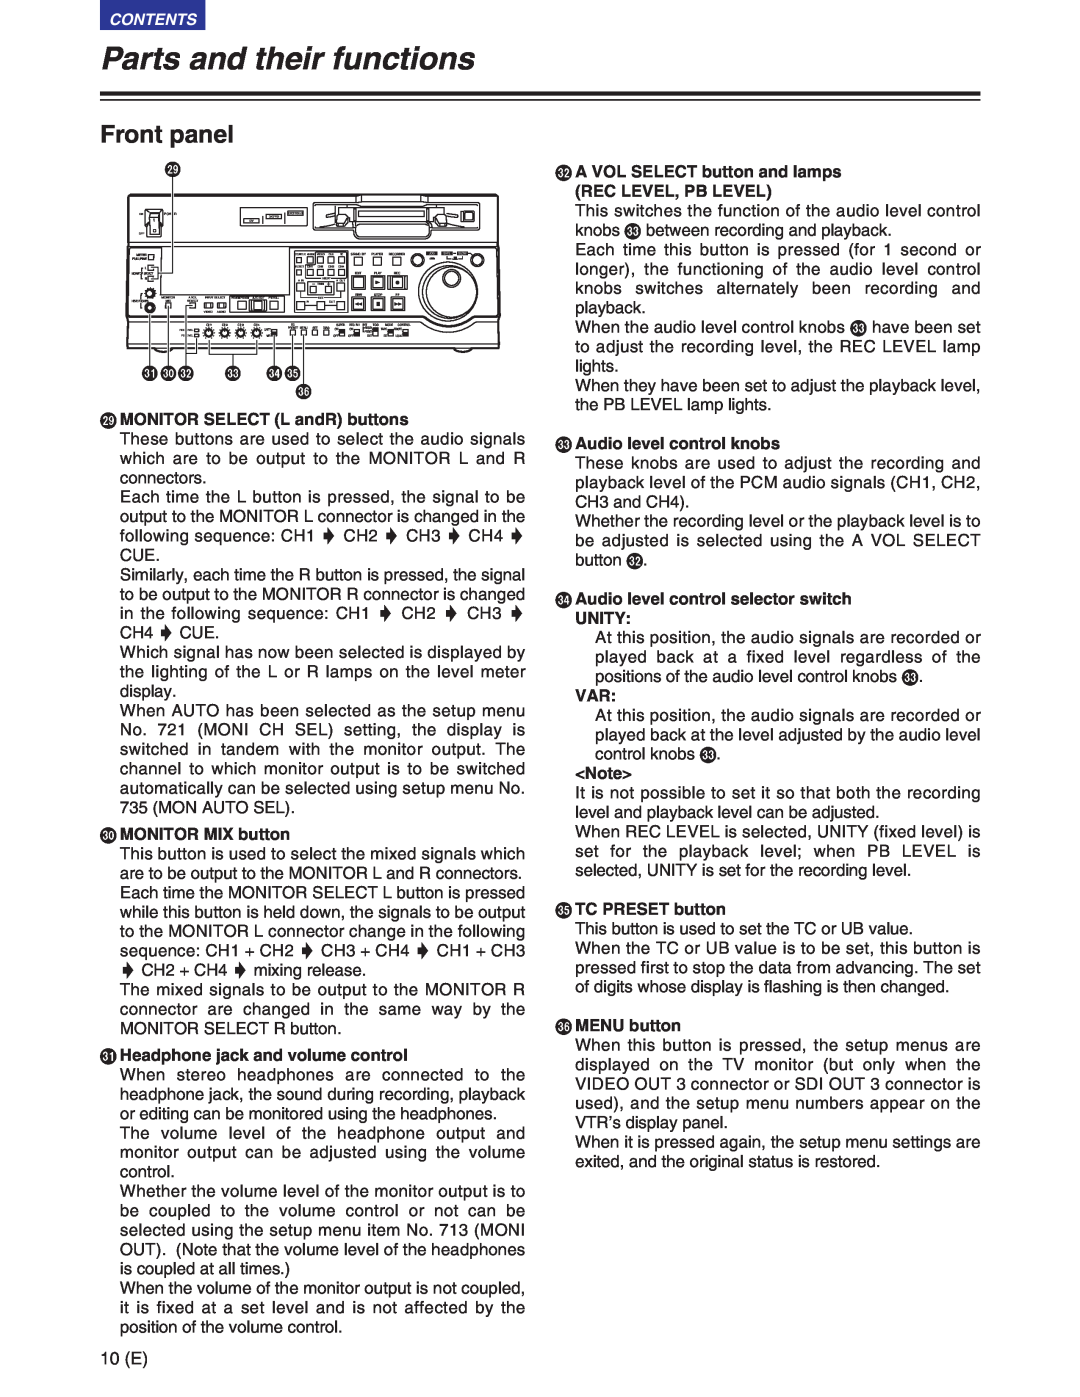 Panasonic AJ-SD930BE, AJ-SD955BE manual Parts and their functions, Front panel, PA VOL SELECT button and lamps 